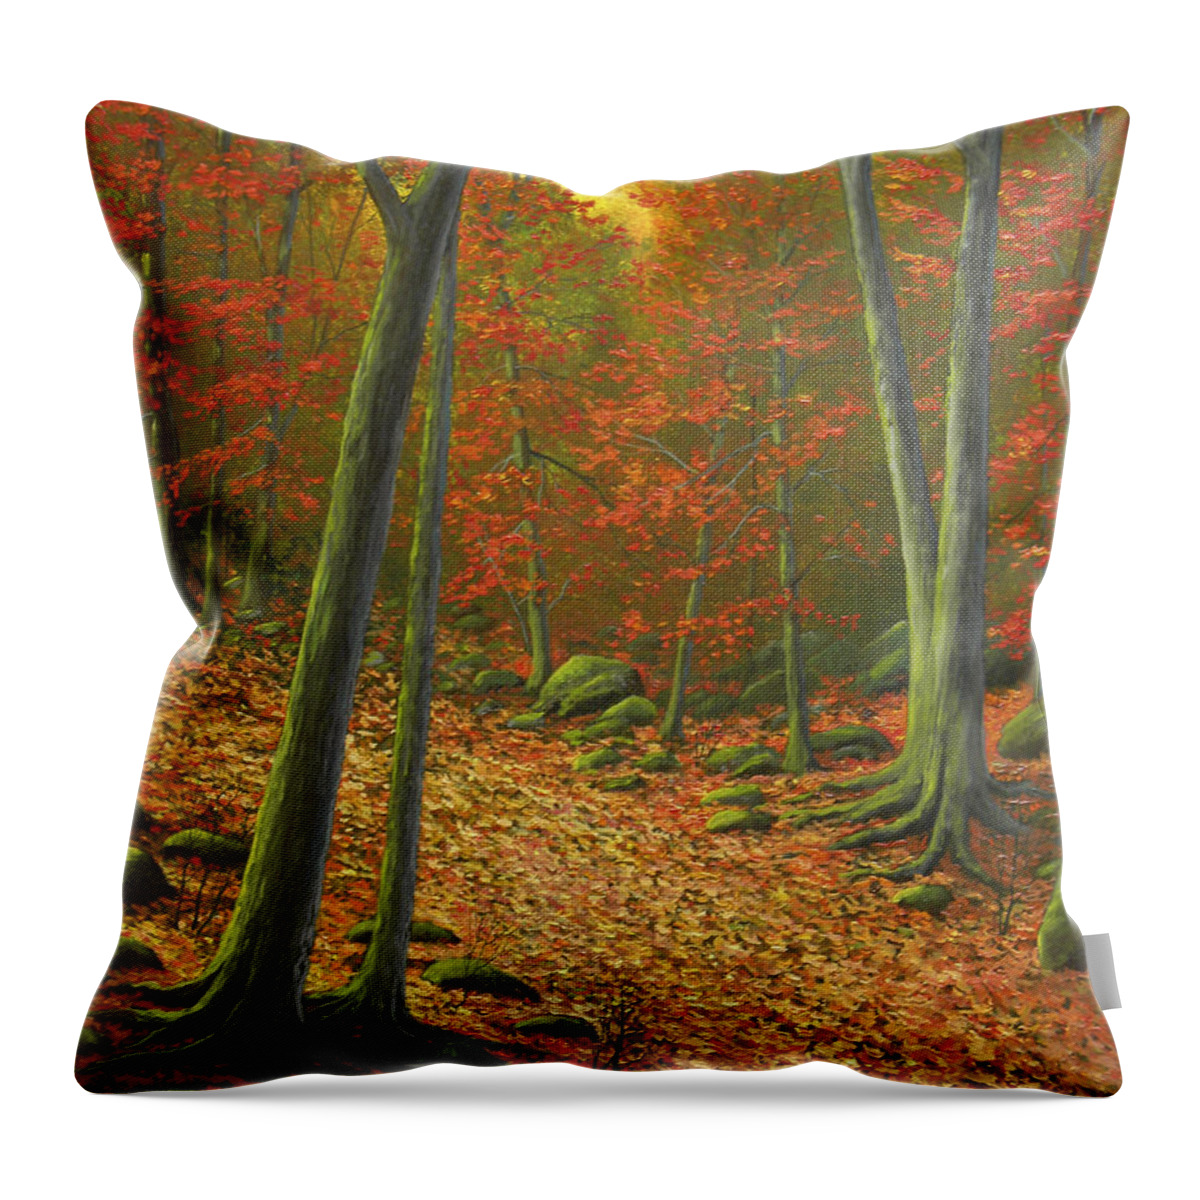 Autumn Leaf Litter Throw Pillow featuring the painting Autumn Leaf Litter by Frank Wilson